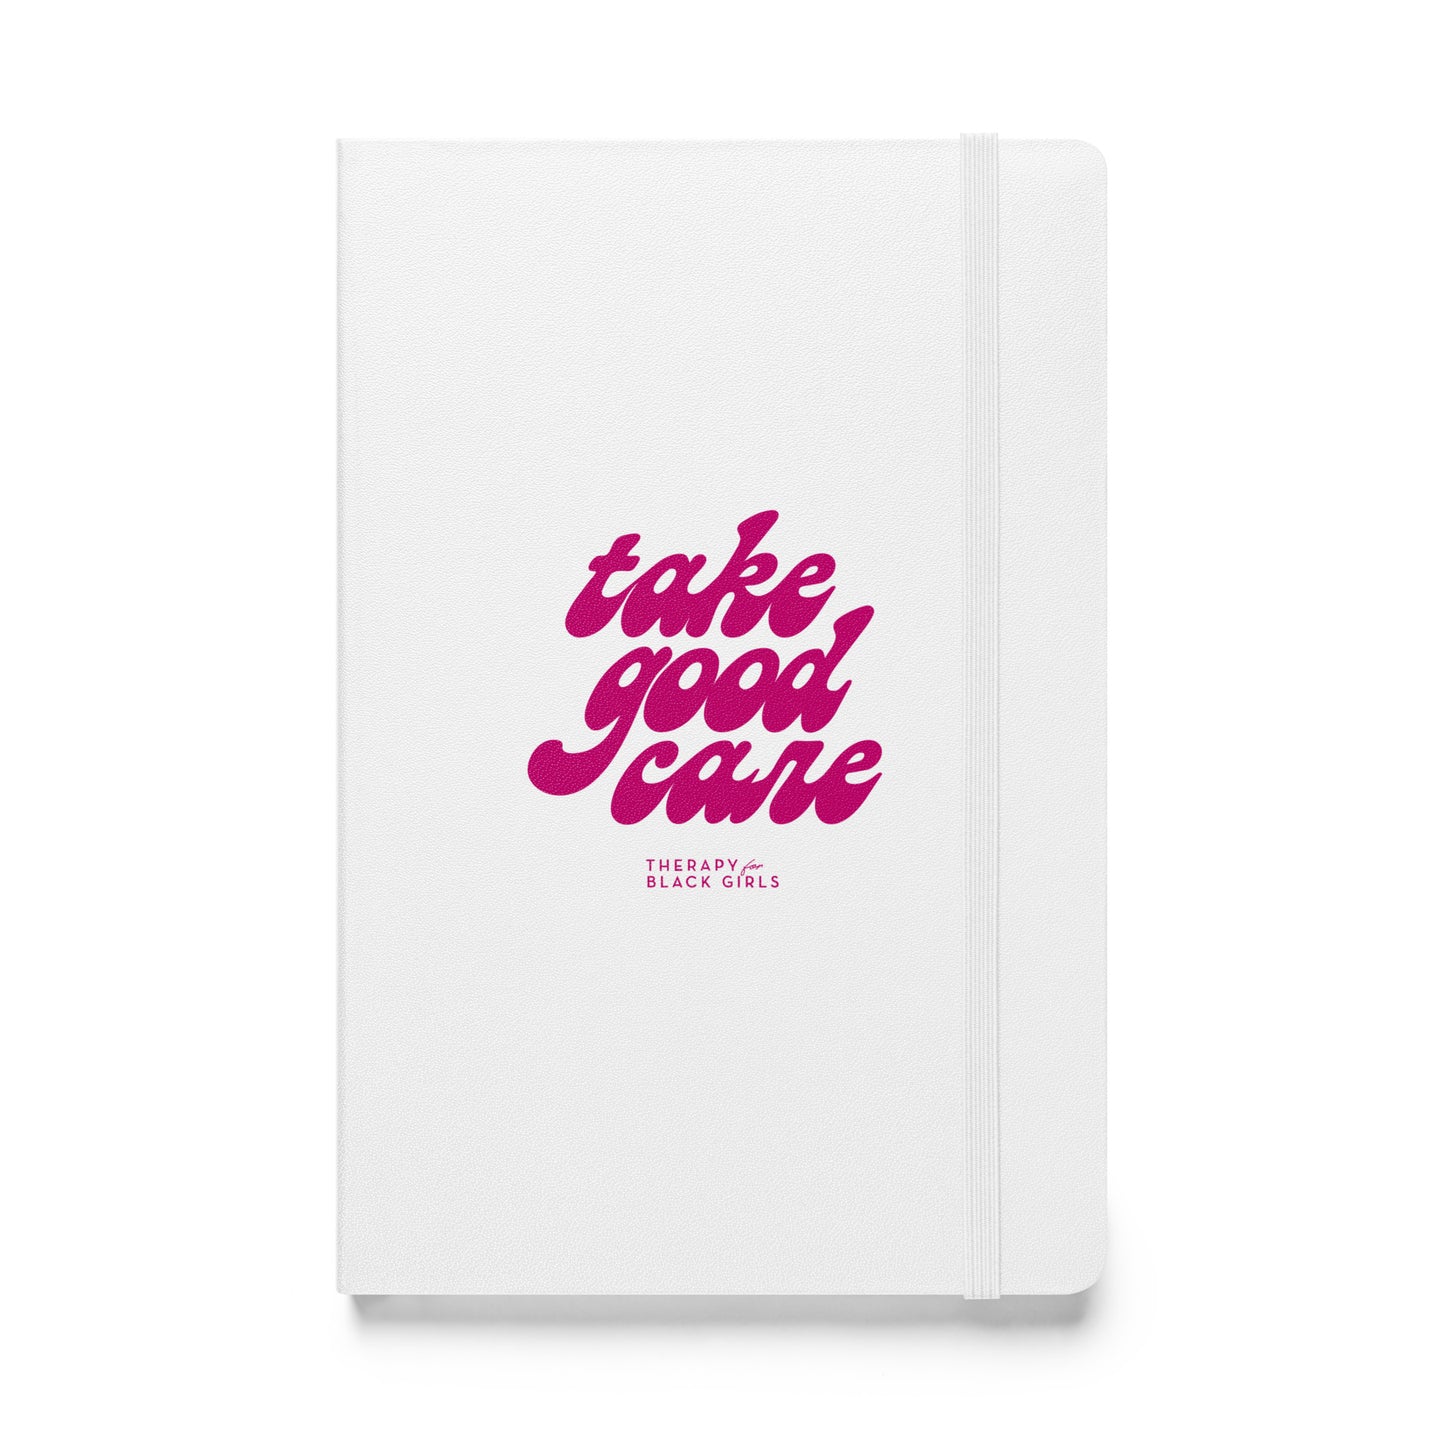 Take Good Care Journal – Groovy